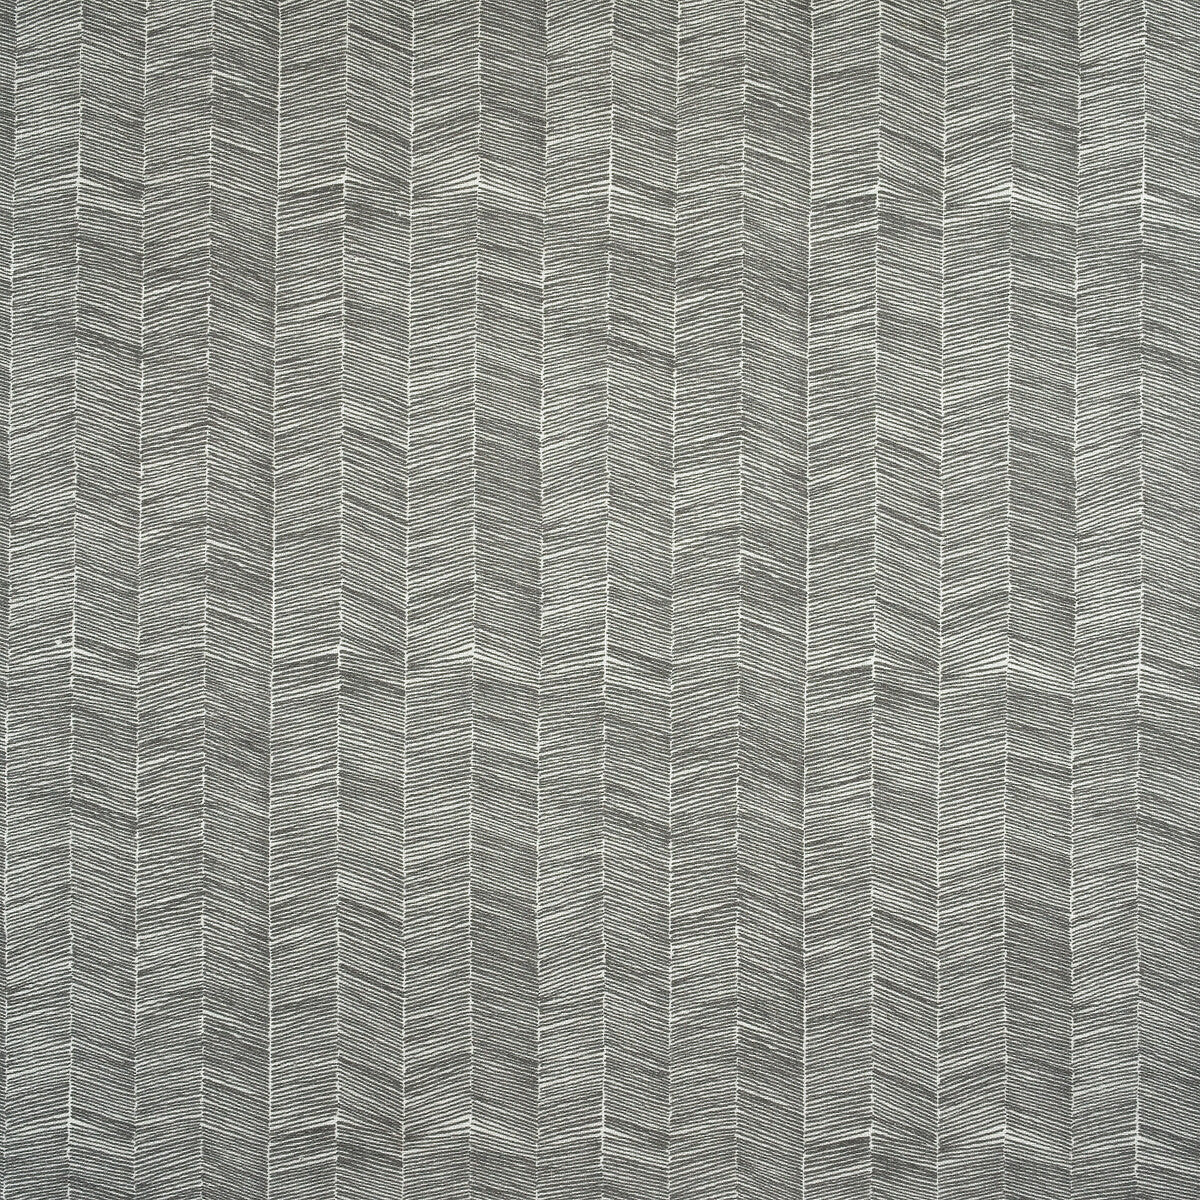 Delta Outdoor fabric in rock color - pattern AM100347.21.0 - by Kravet Couture in the Andrew Martin The Great Outdoors collection